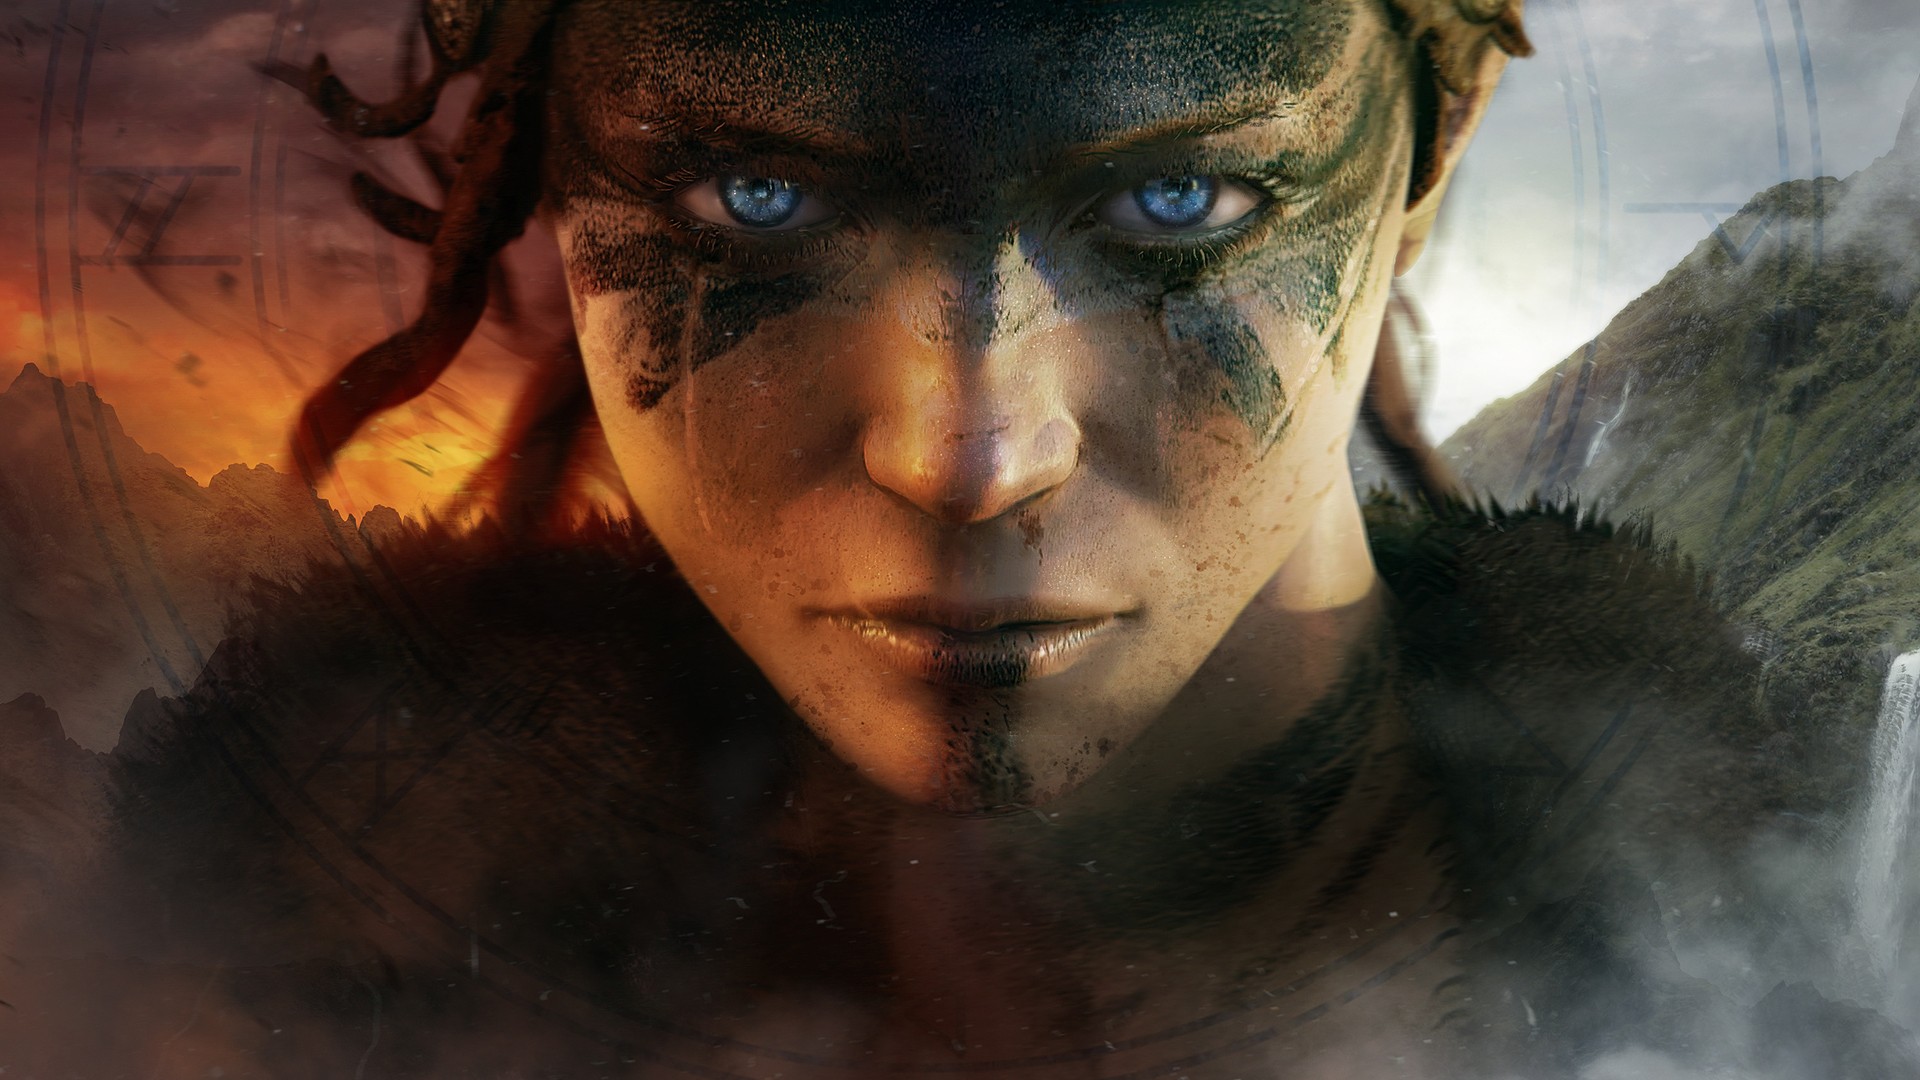 General 1920x1080 Hellblade: Senua's Sacrifice video games blue eyes face closeup looking at viewer video game girls video game characters fantasy art video game art fantasy girl women